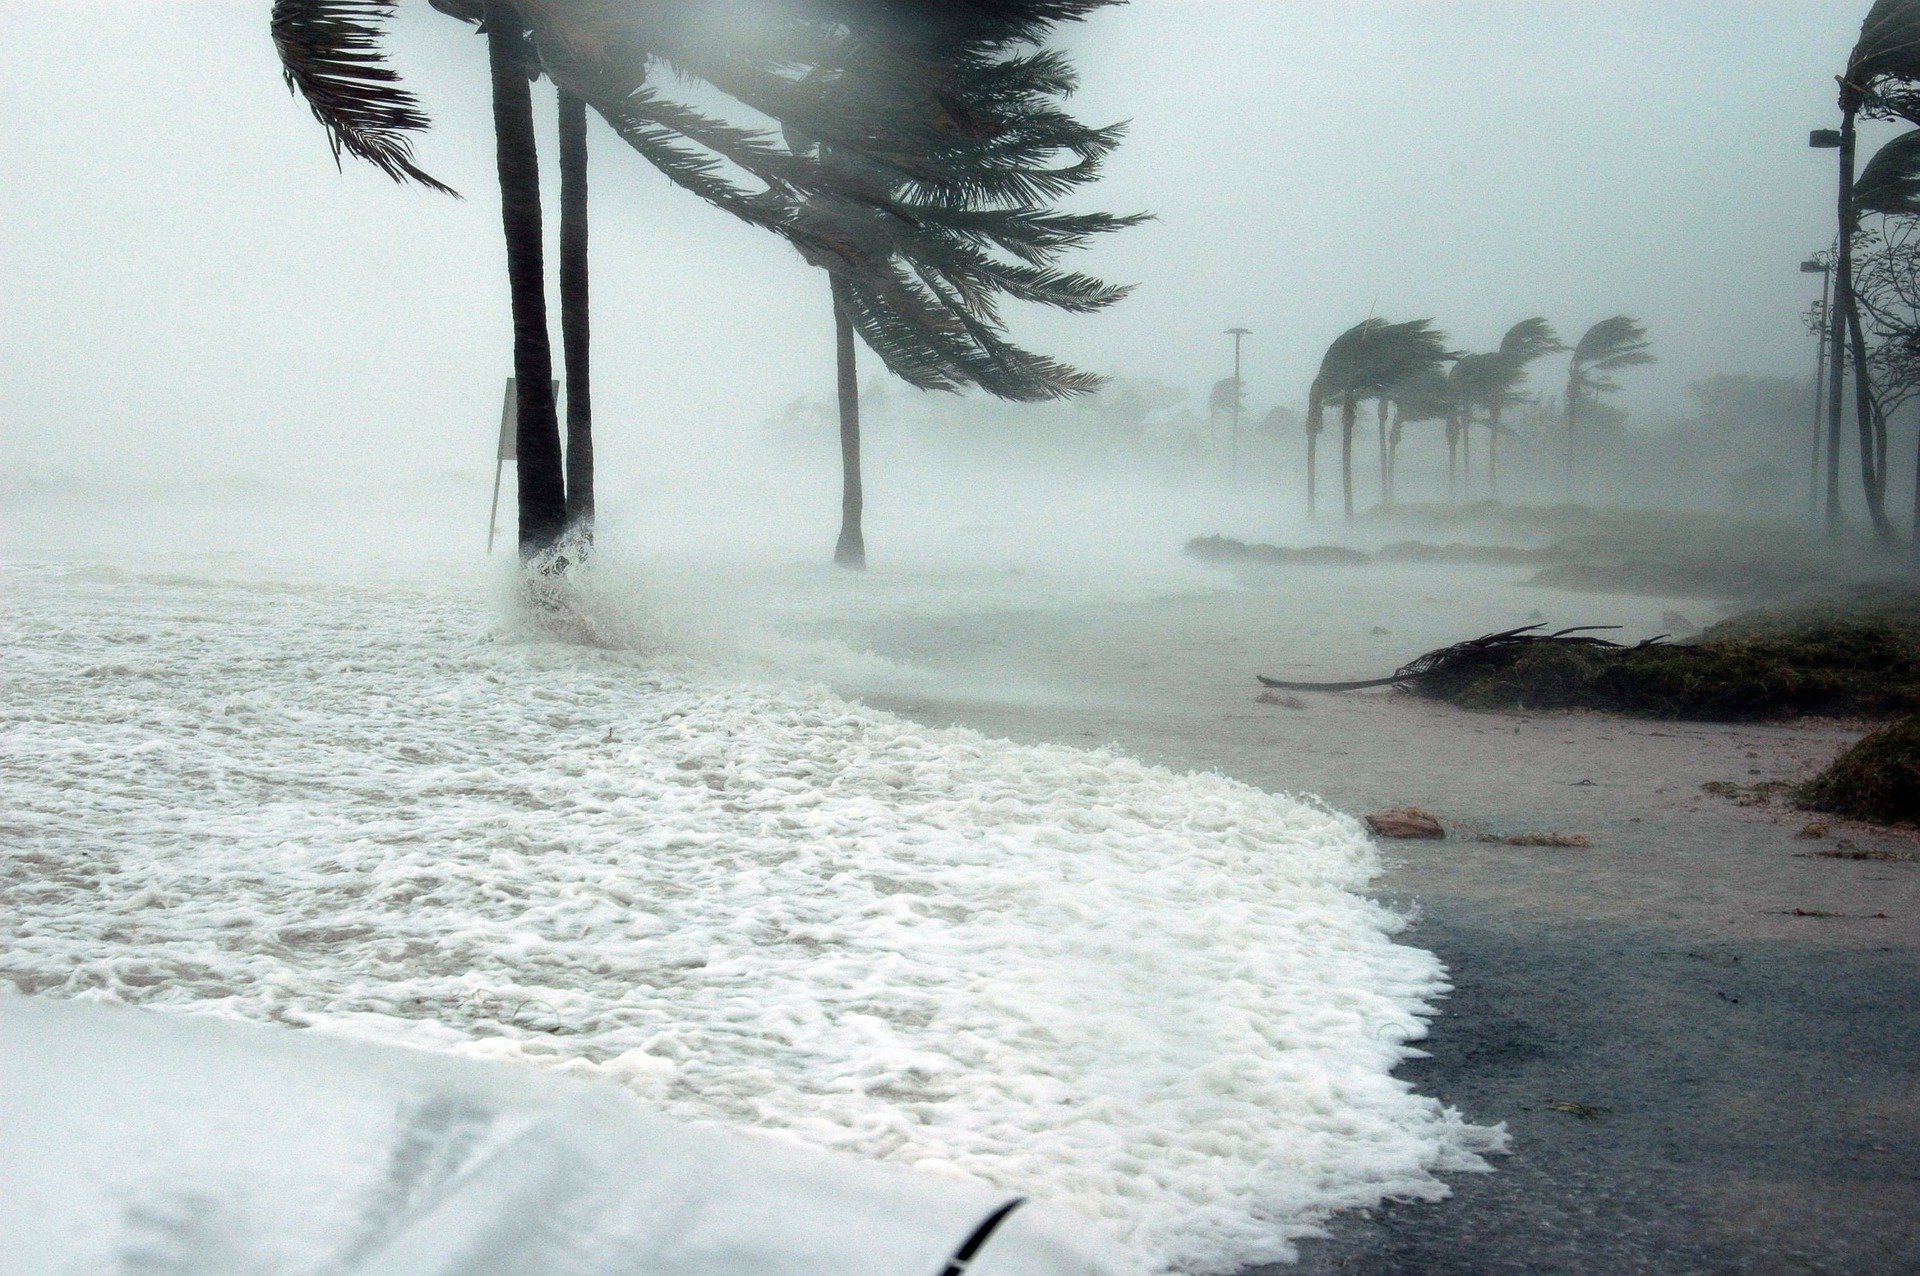 strong storm winds sway the palm trees and waves crash on the shore